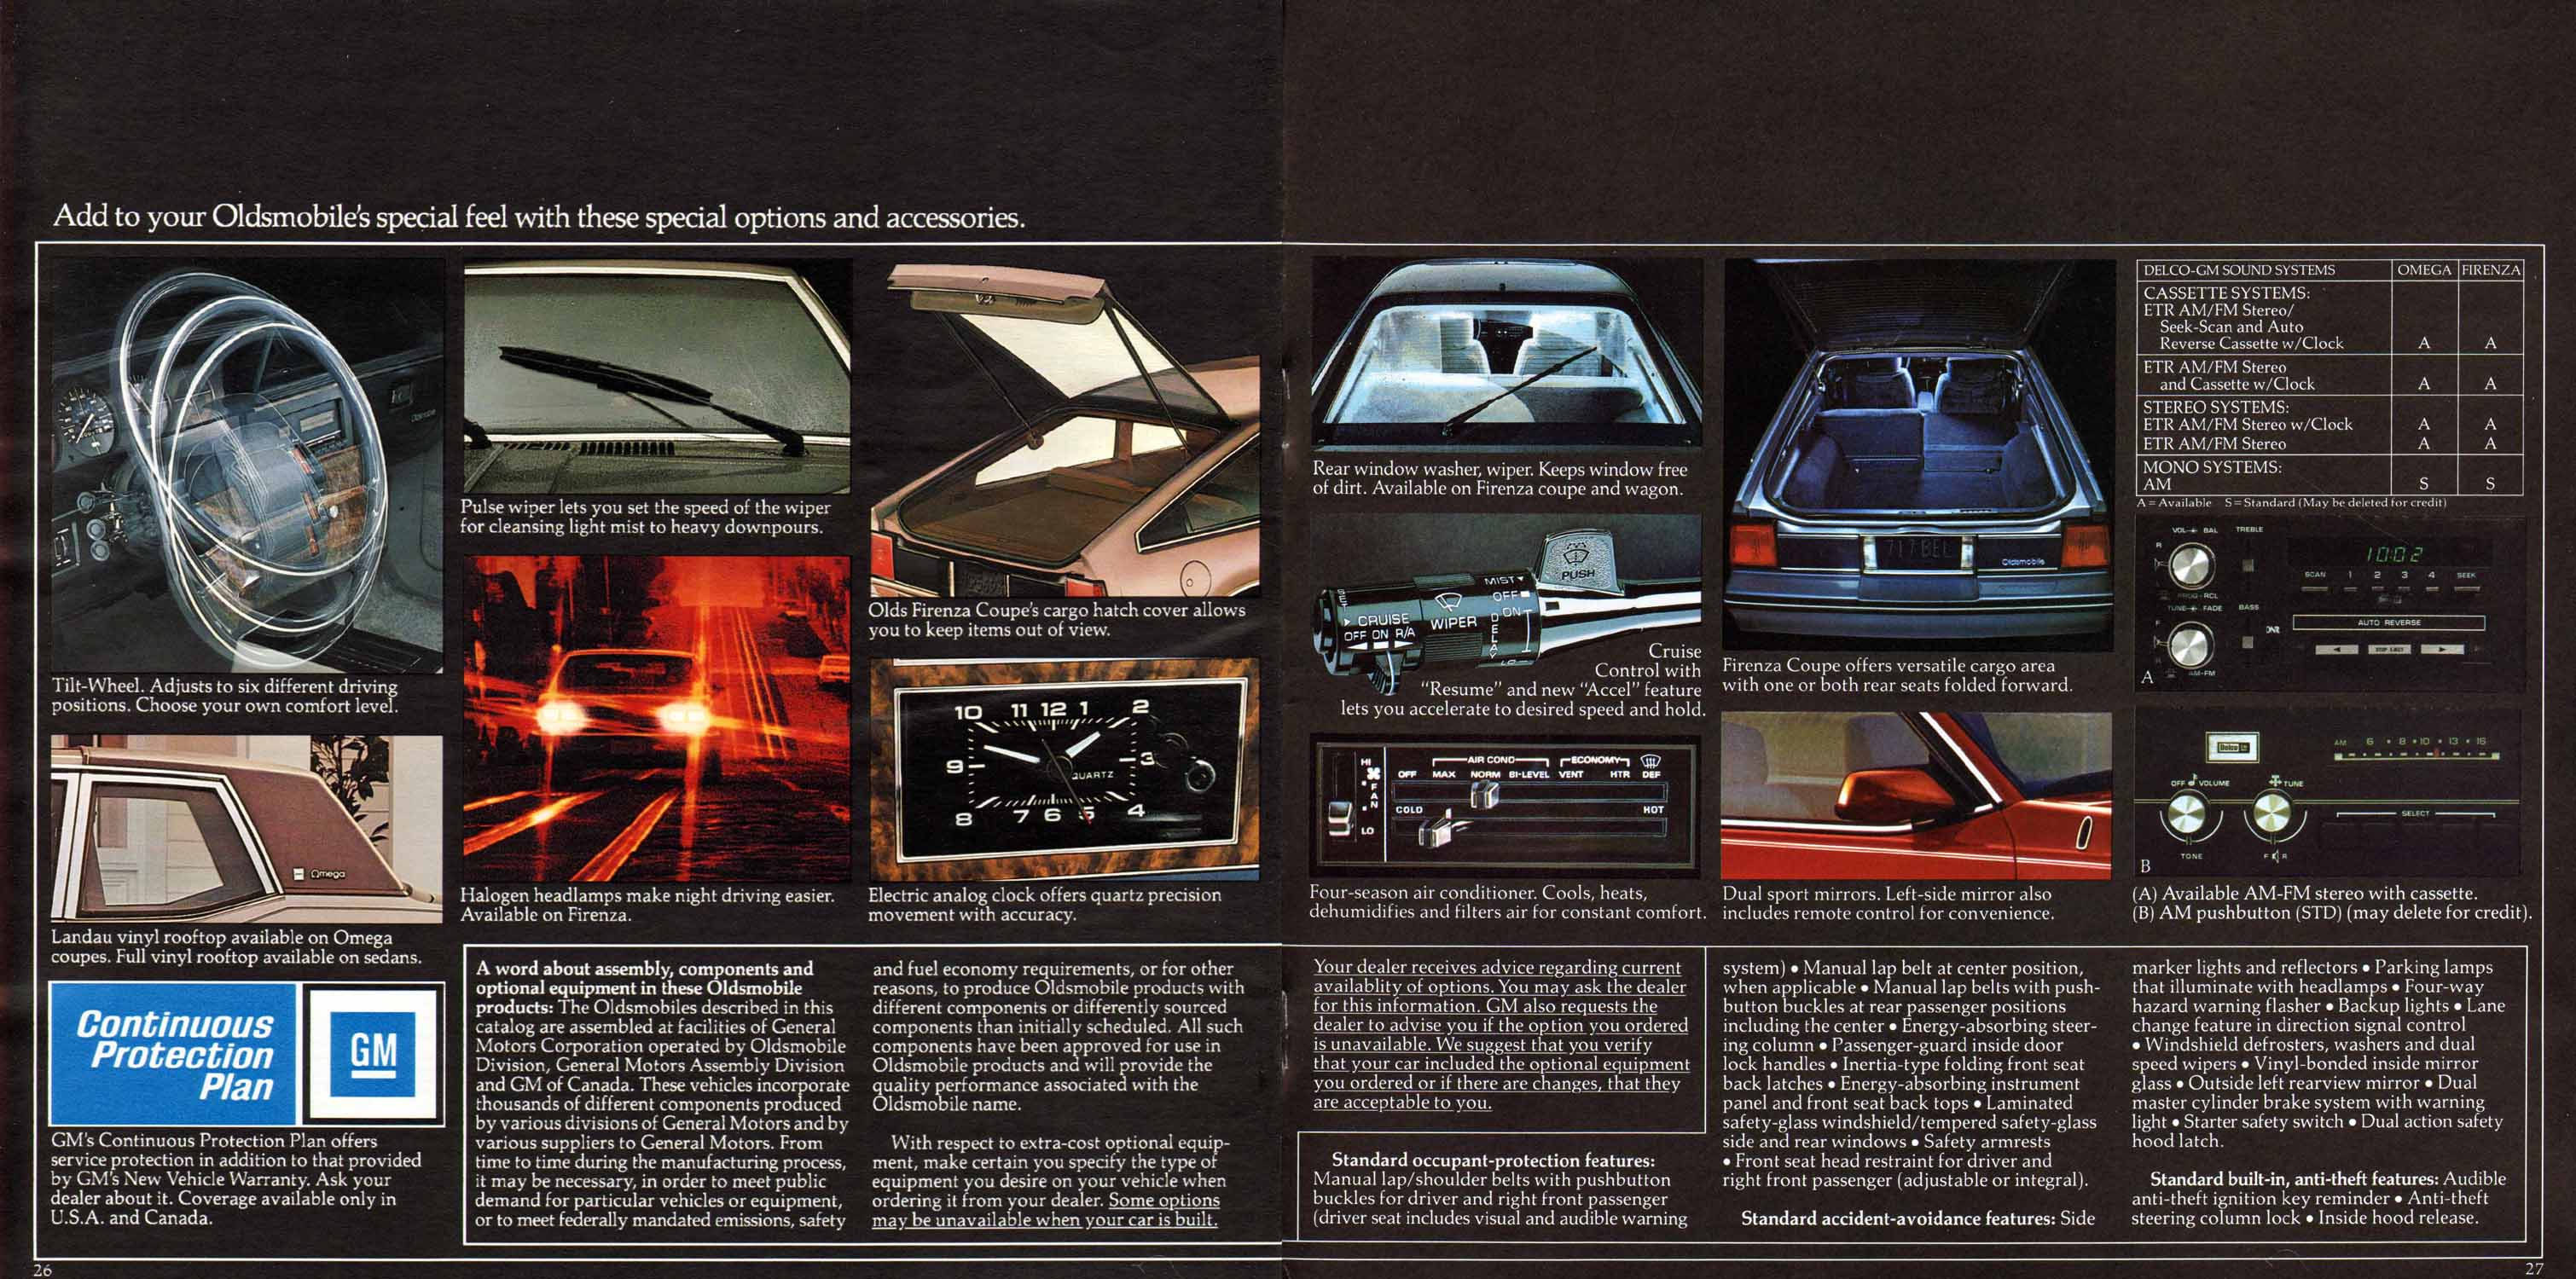 1984 Oldsmobile Small Size-26-27